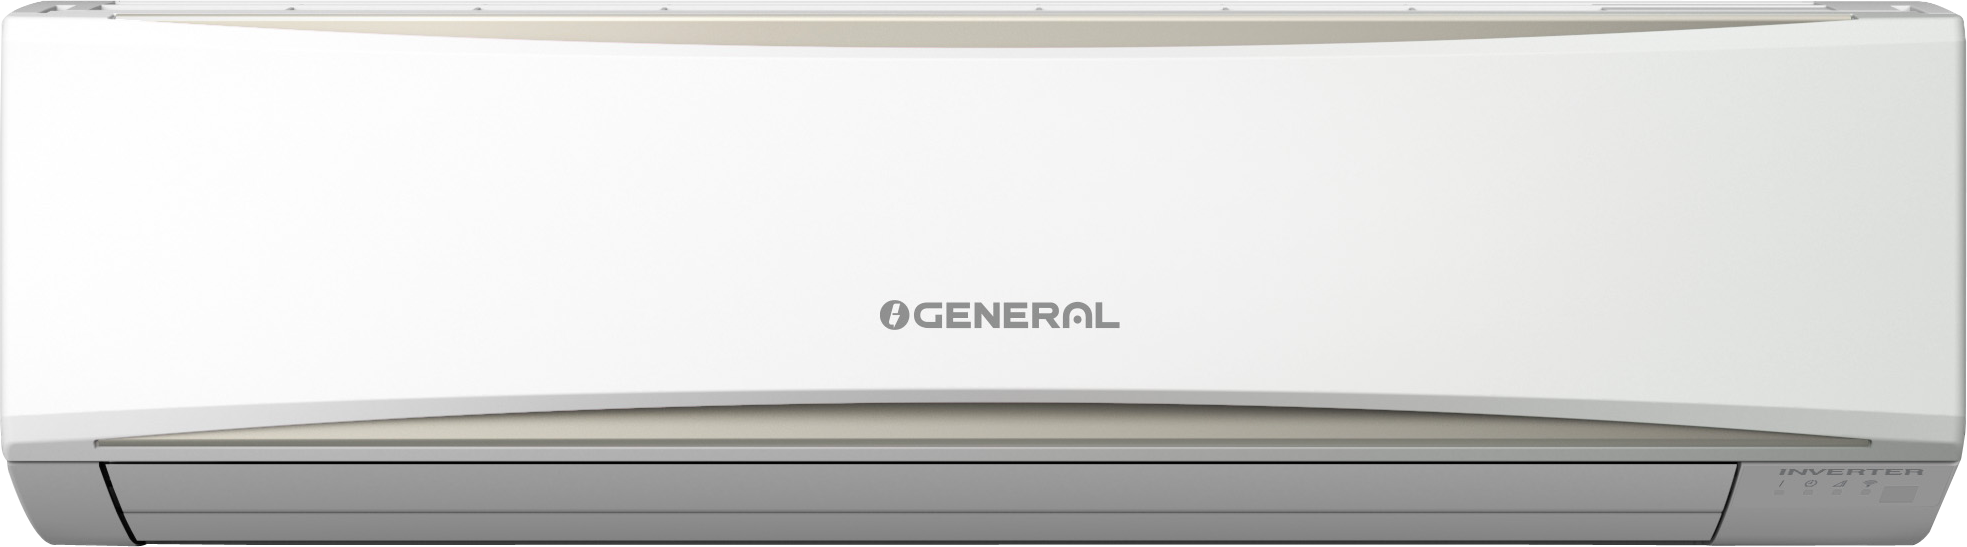 O General Air Conditioners